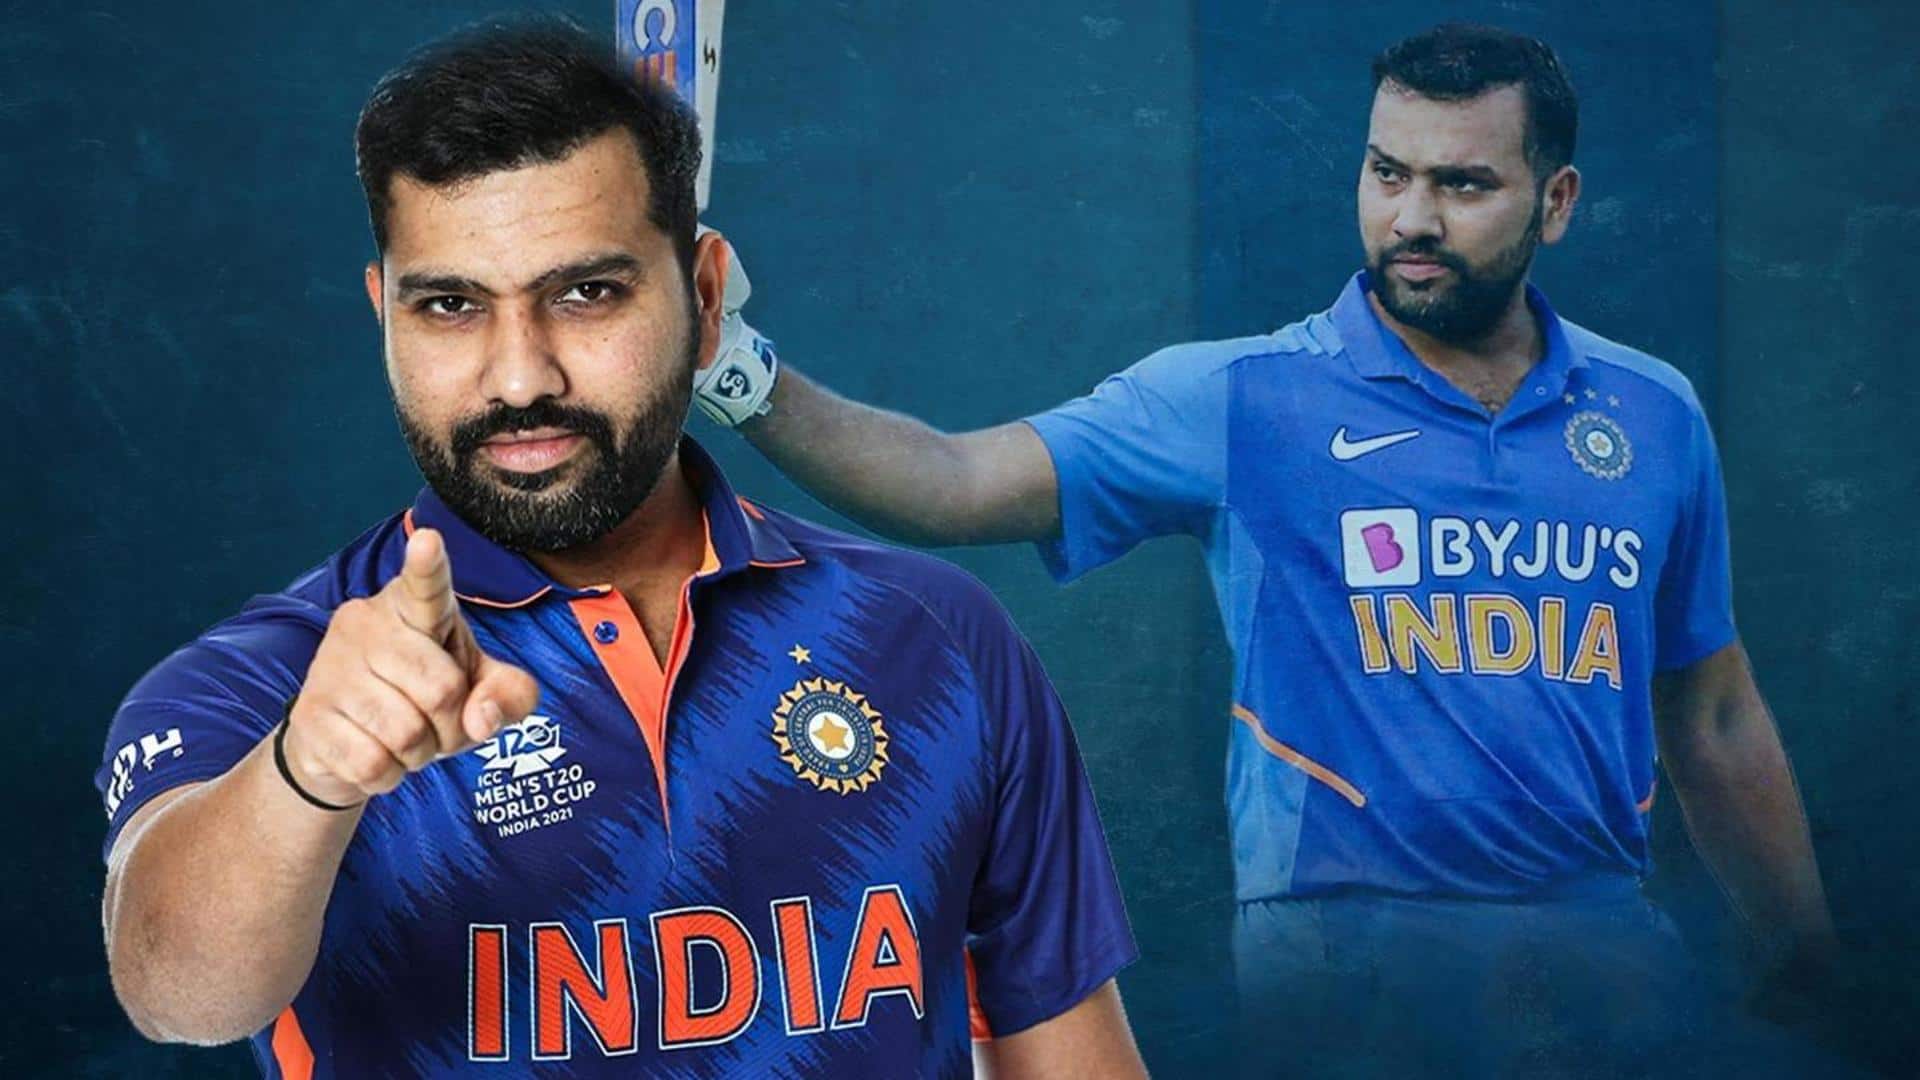 Rohit breaks Dhoni's record of most ODI sixes in India